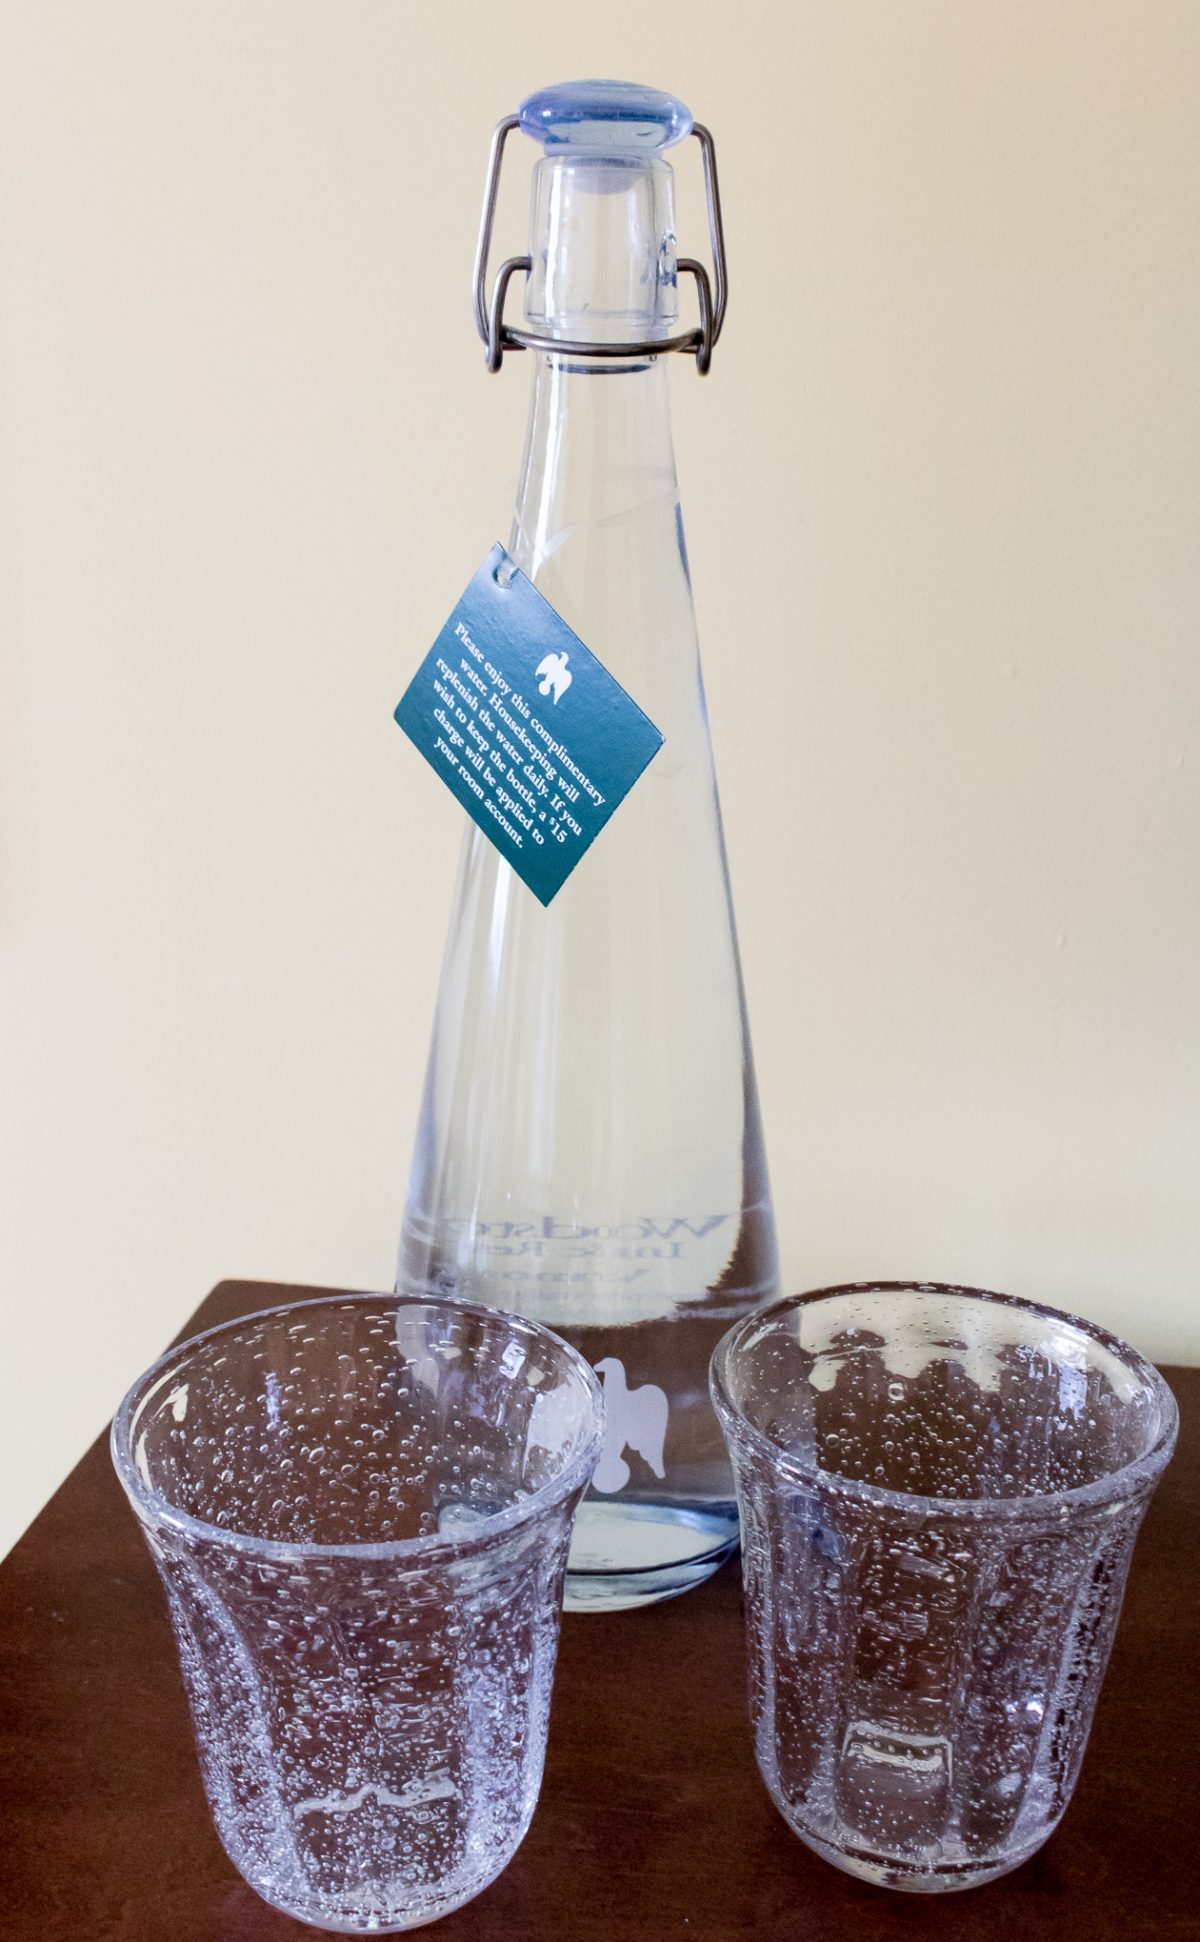 Glass Water Bottle and Speckled Glasses at Woodstock Inn and Resort in Woodstock Vermont